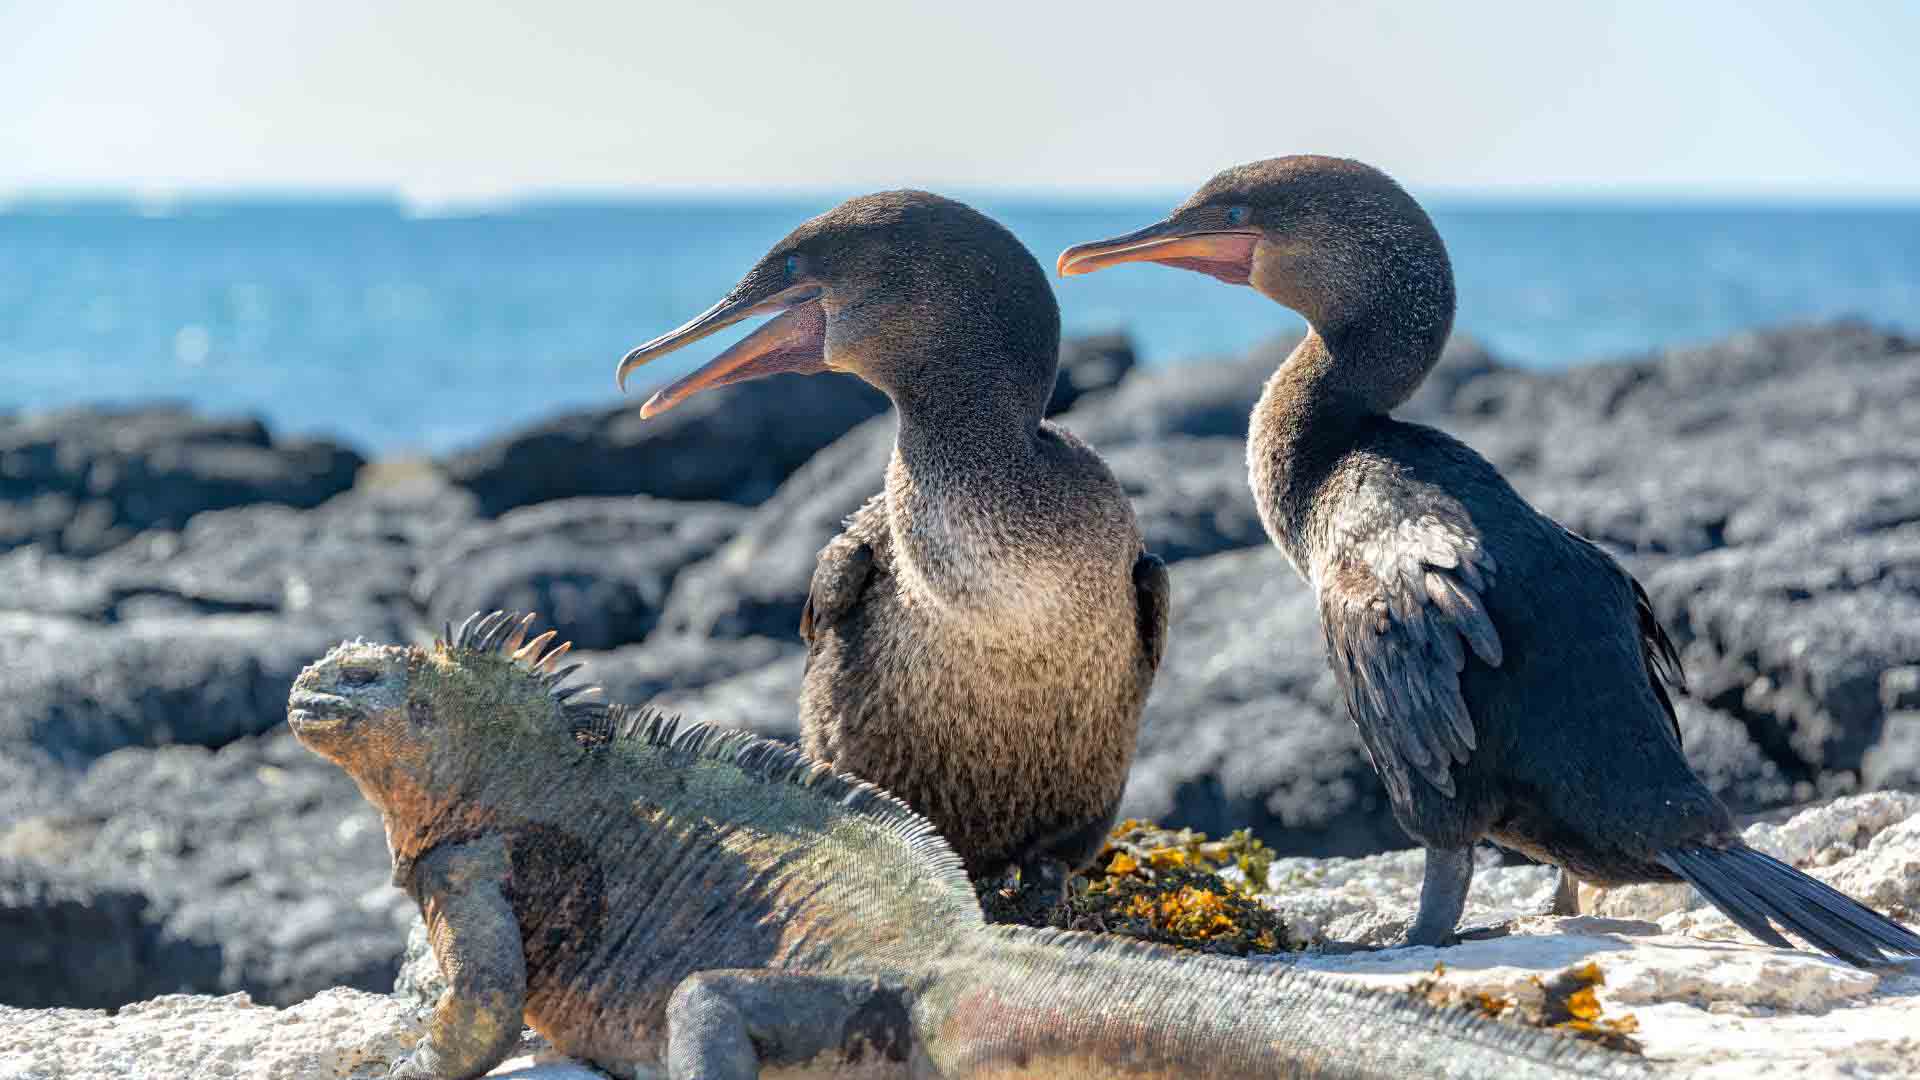 Galapagos Cruise & Travel Itinerary 5 day West Islands